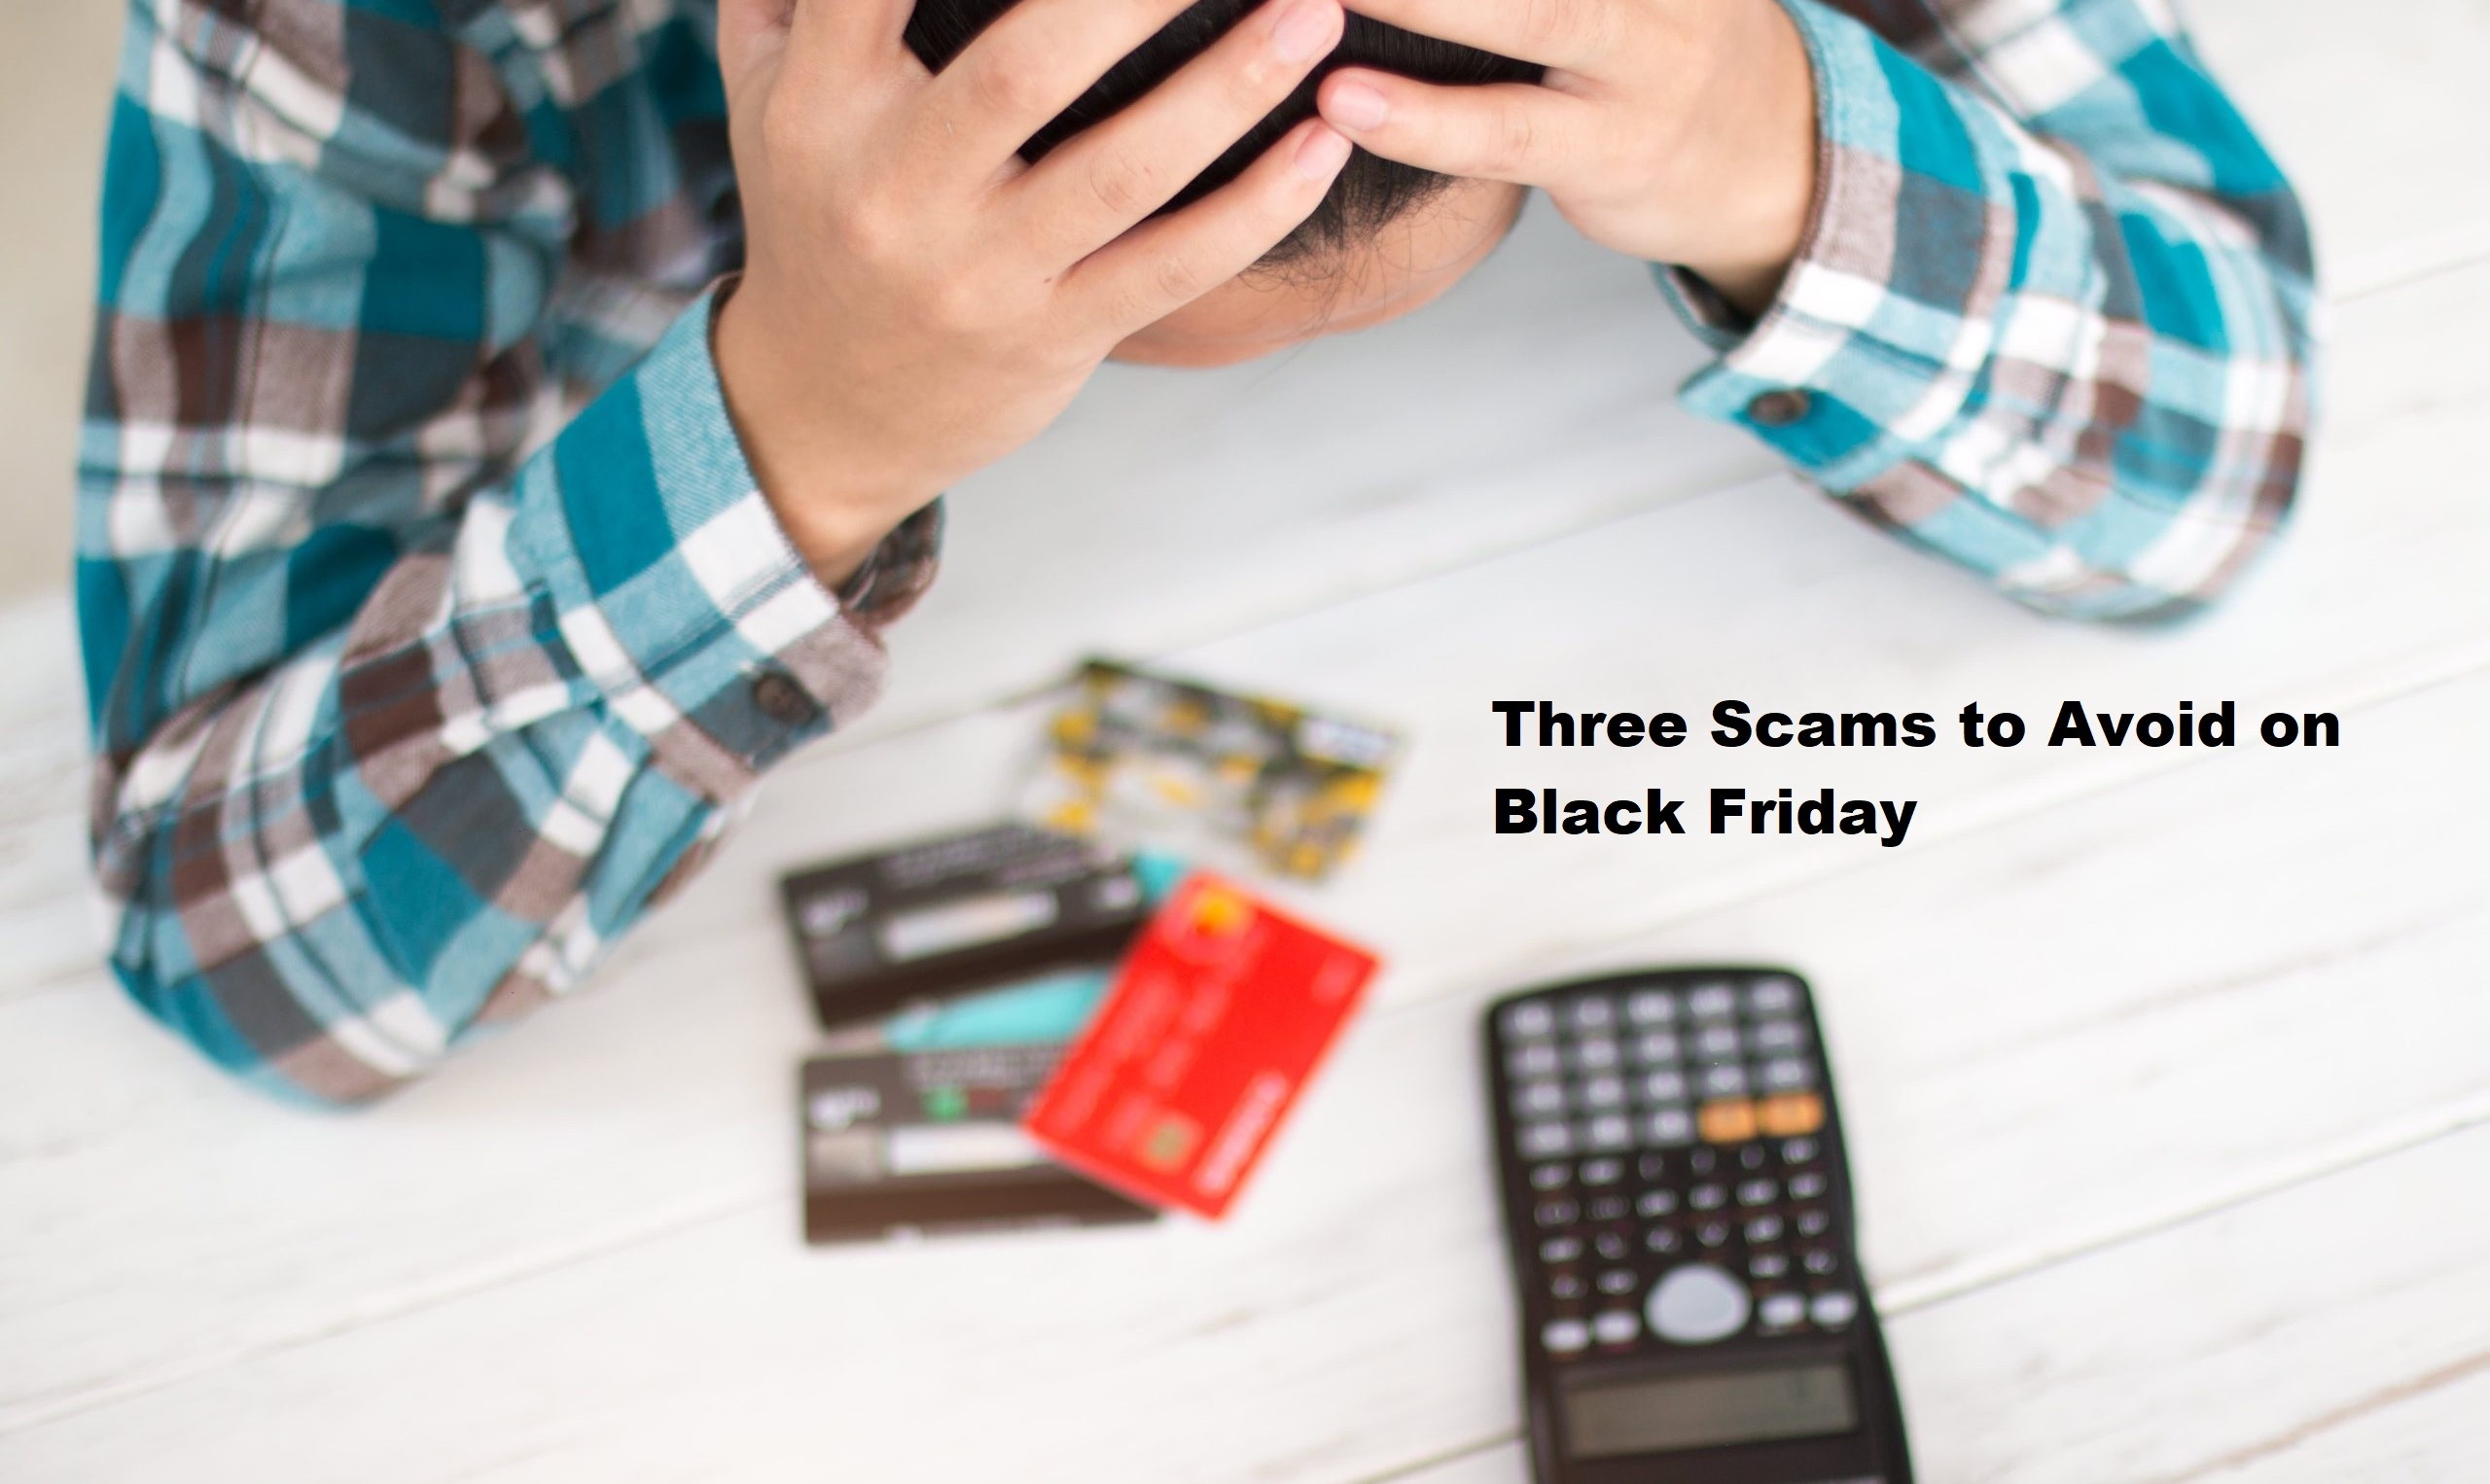 Three Scams to Avoid on Black Friday